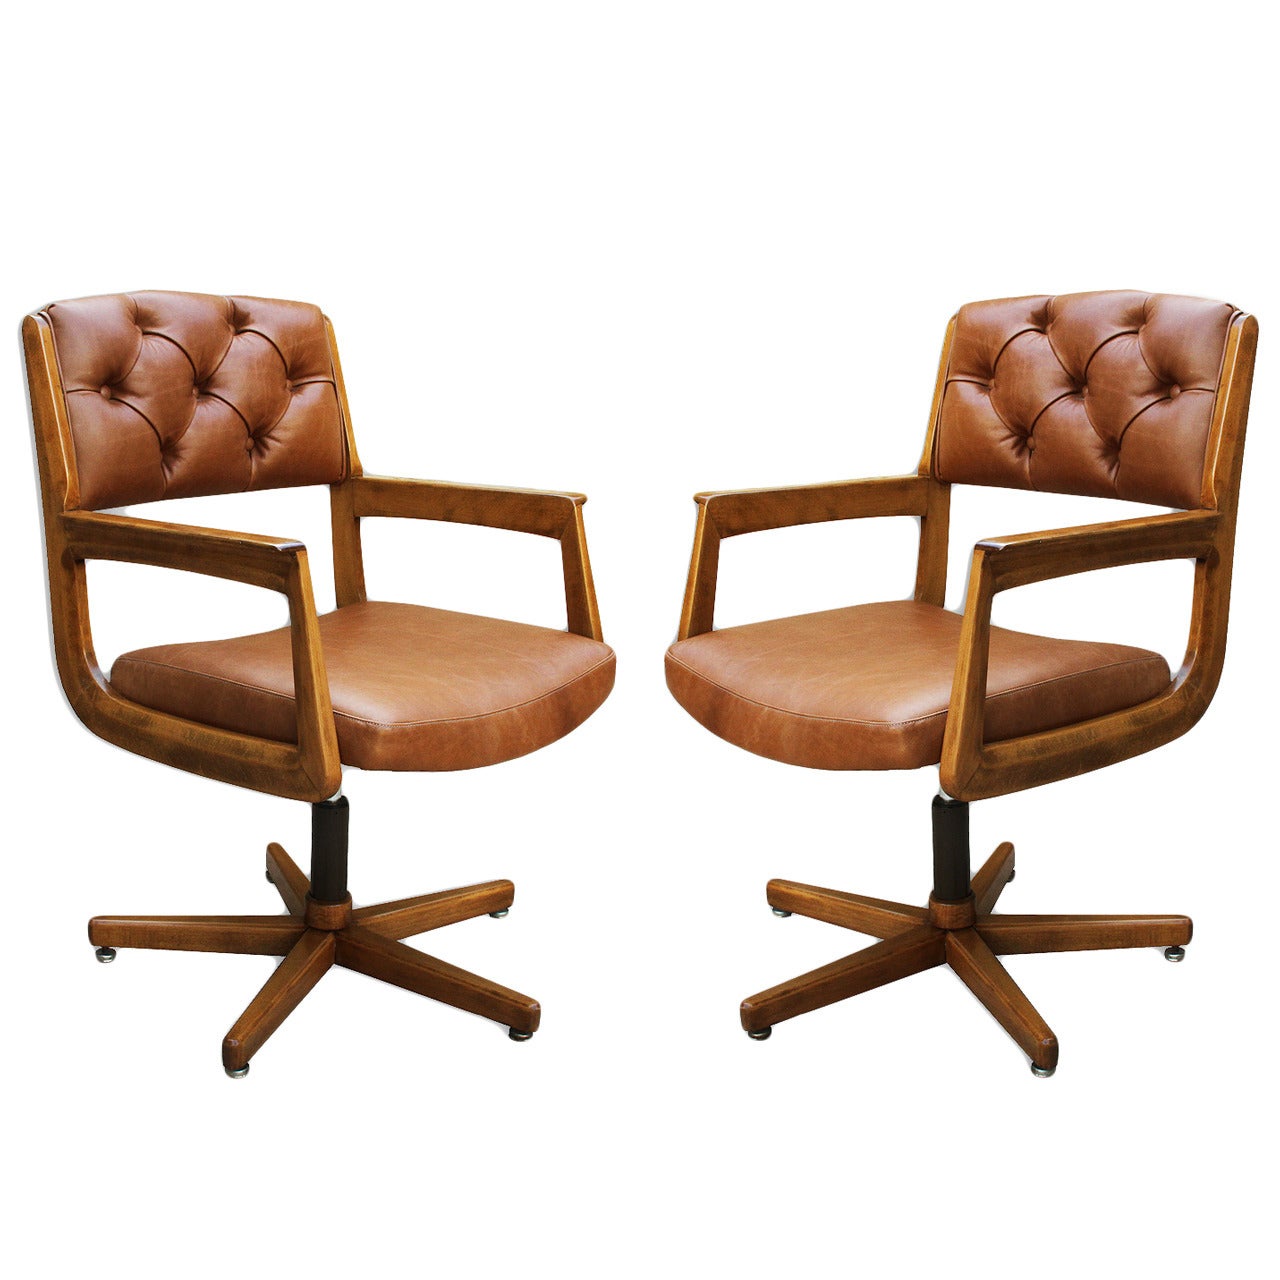 Pair of Leather Swivel Visitor Chairs, France, circa 1950s